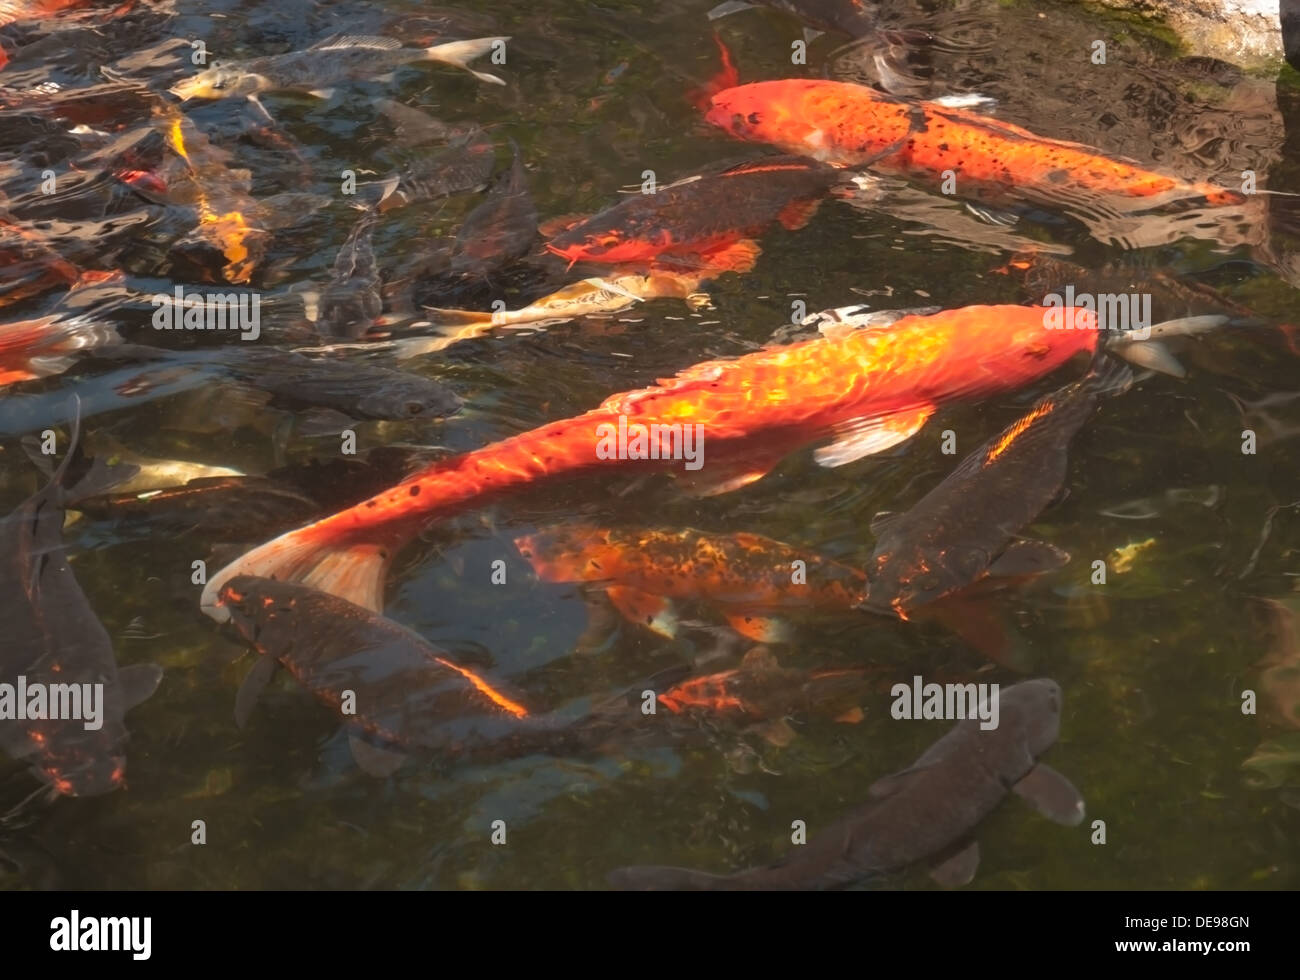 Red carp in a fish pond. Stock Photo